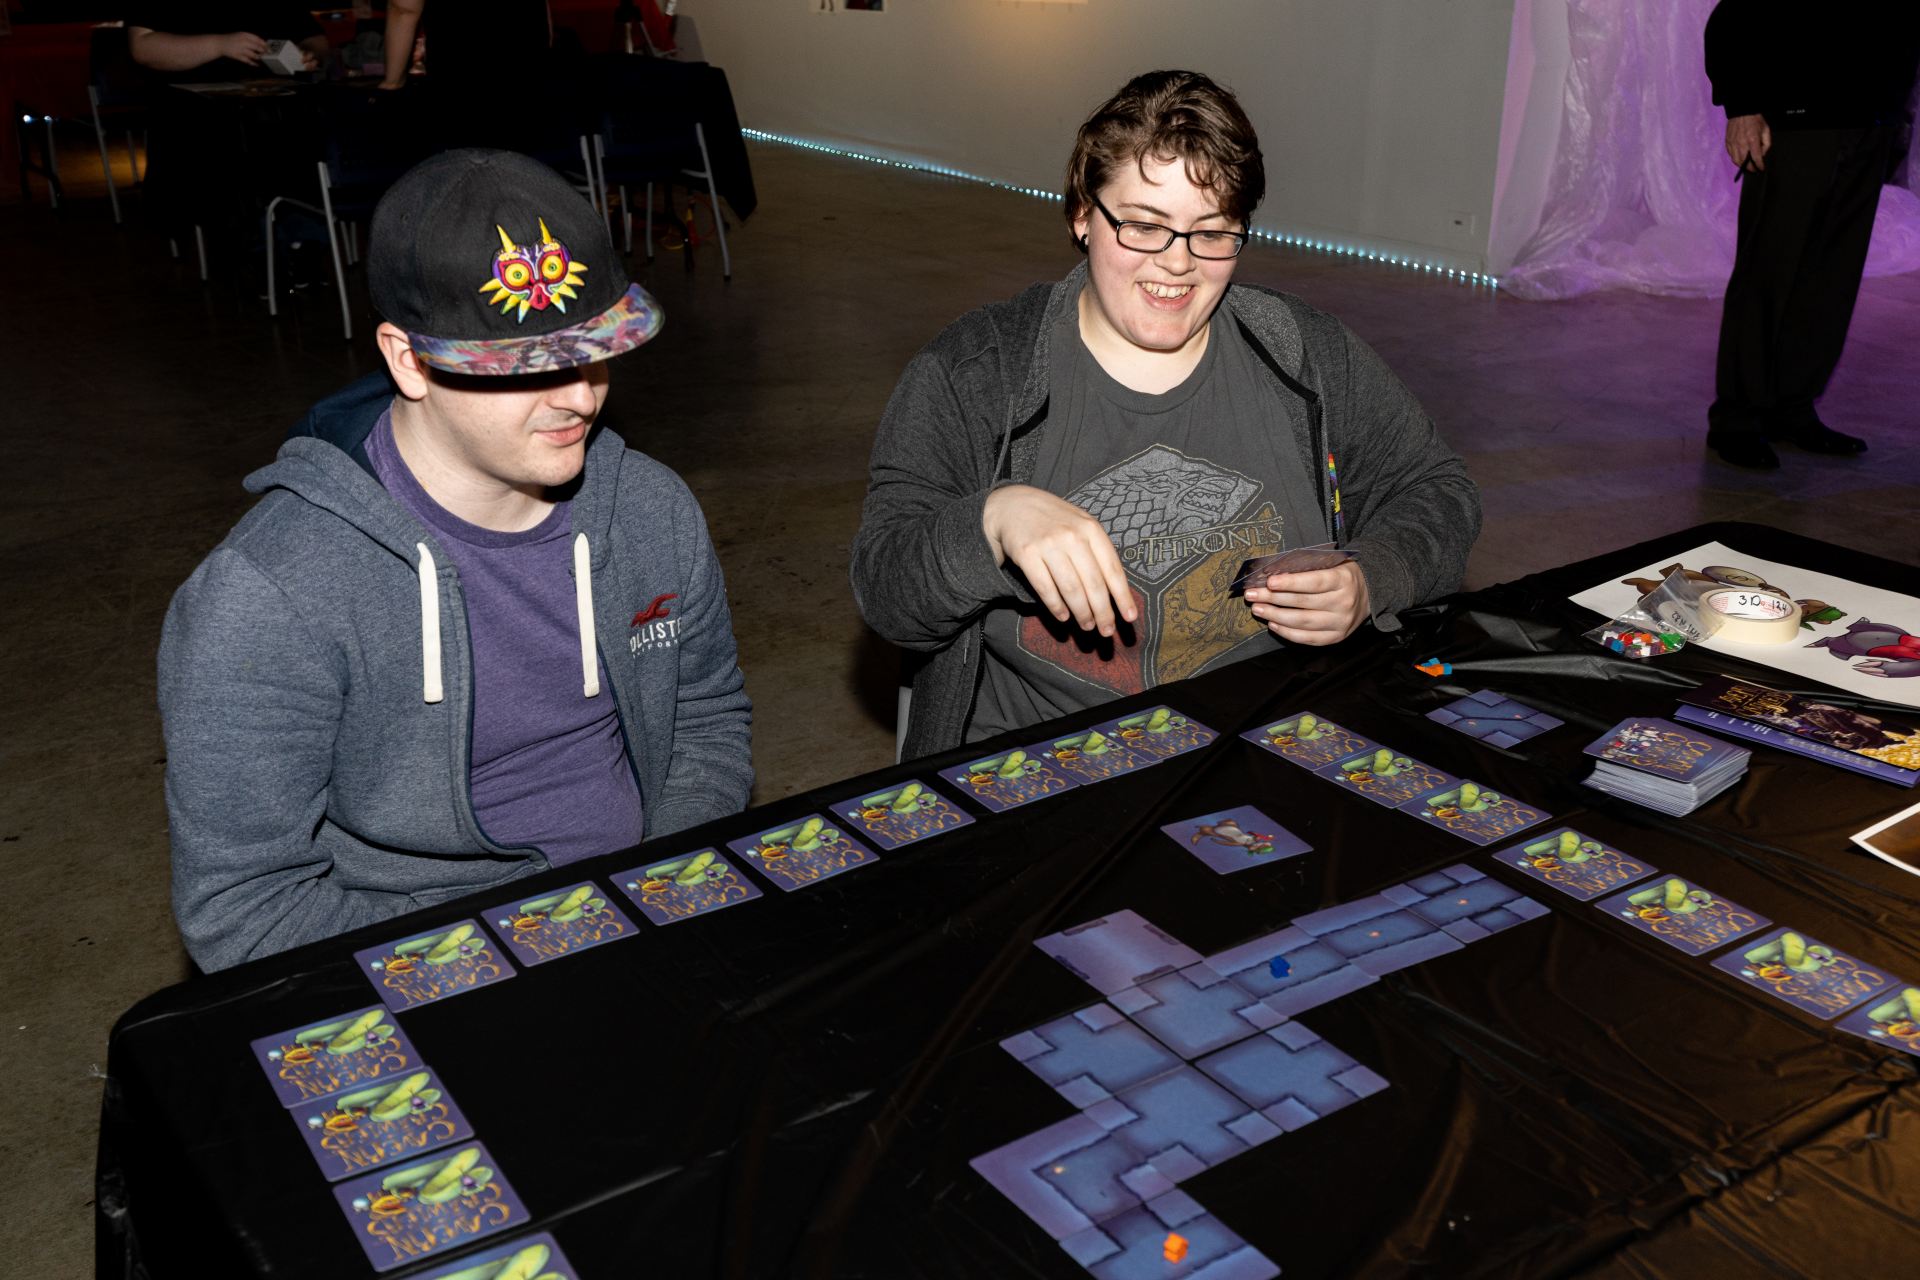 Choose your own adventure: Students demonstrate creations at Games Showcase – News